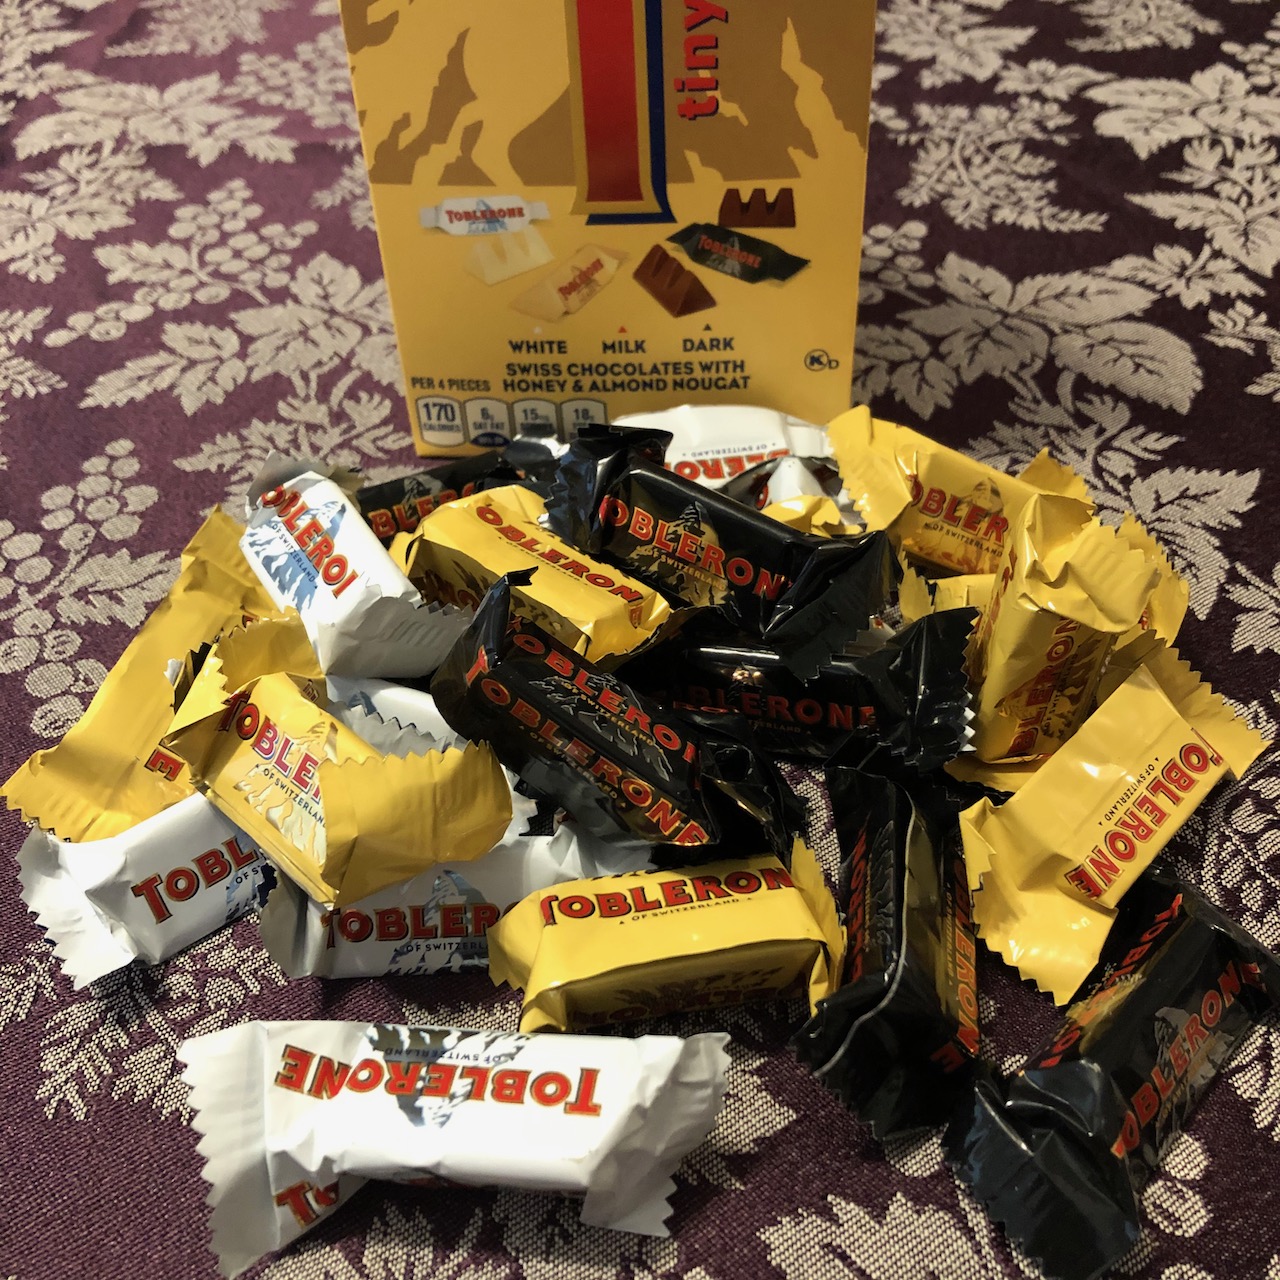 Cult: Are You Ready National Toblerone Day?